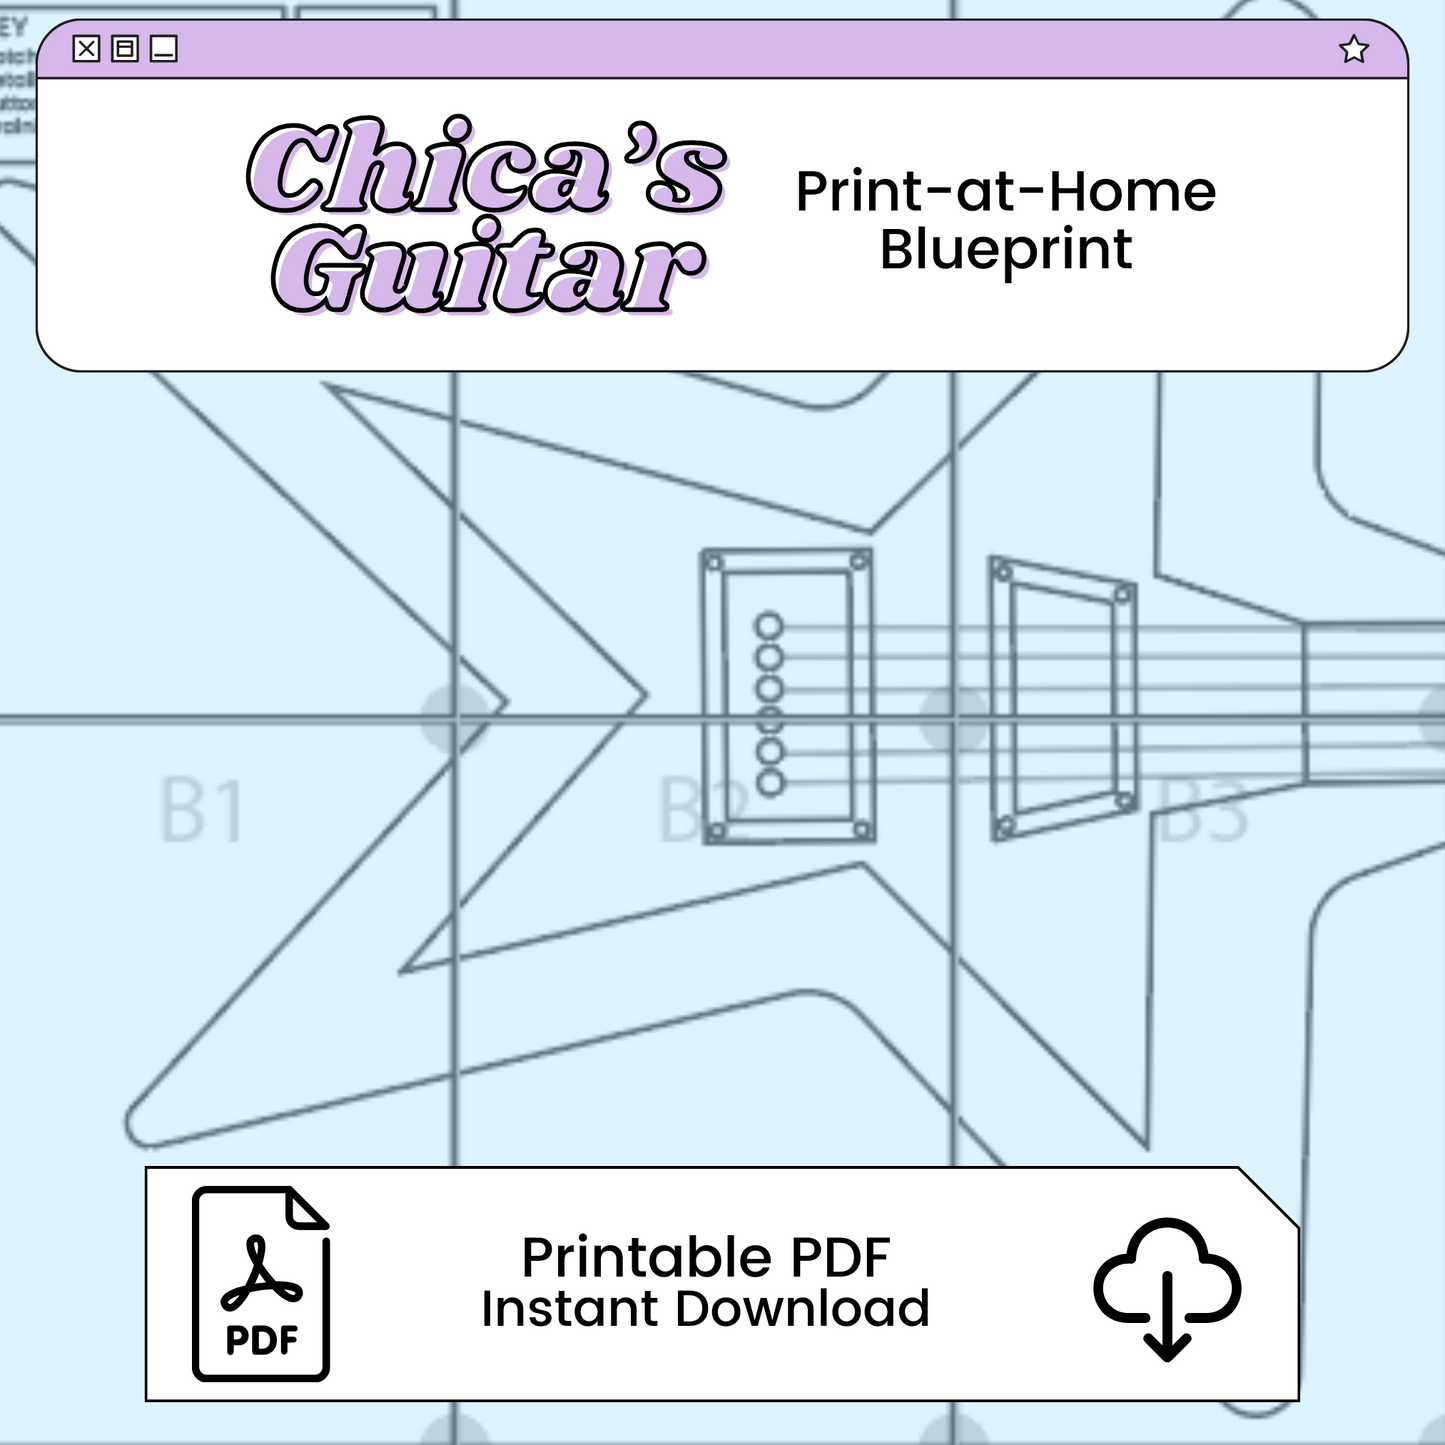 Chica's Guitar Printable Cosplay Blueprint | Inspired by Five Nights at Freddy's